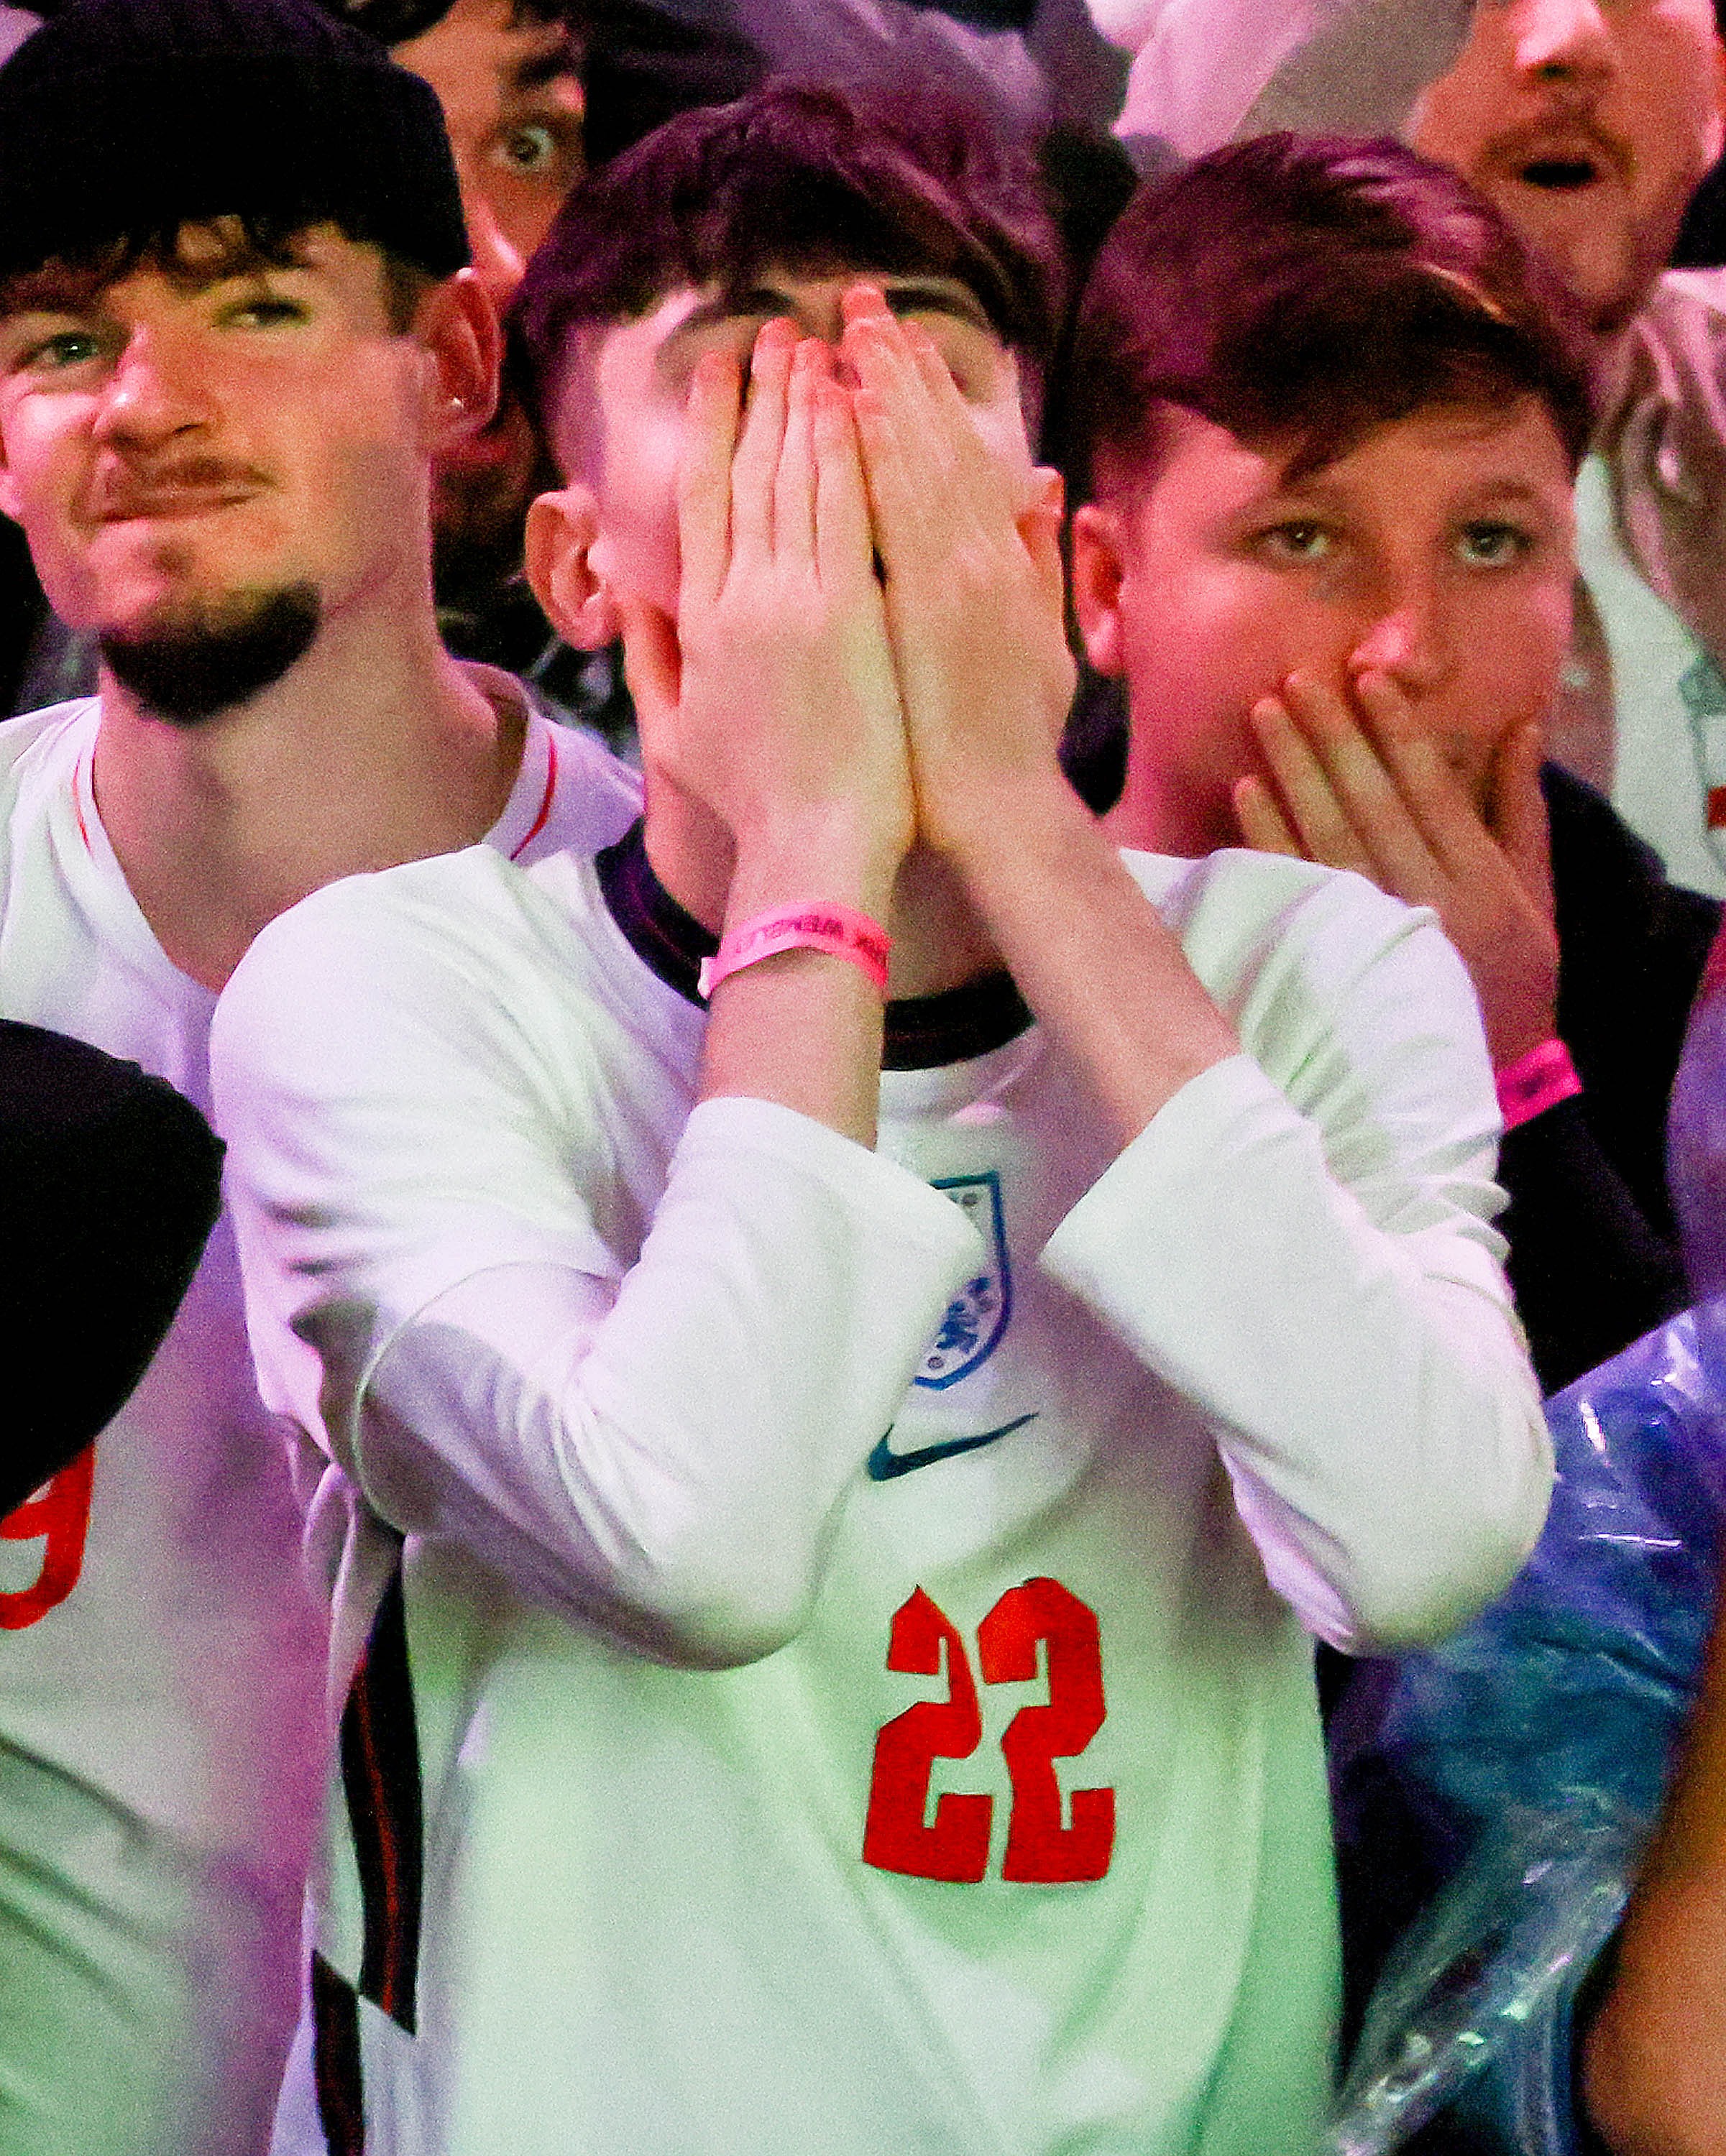 , England fans spend £350million on booze in pubs as they drown their misery as Three Lions crash out of World Cup